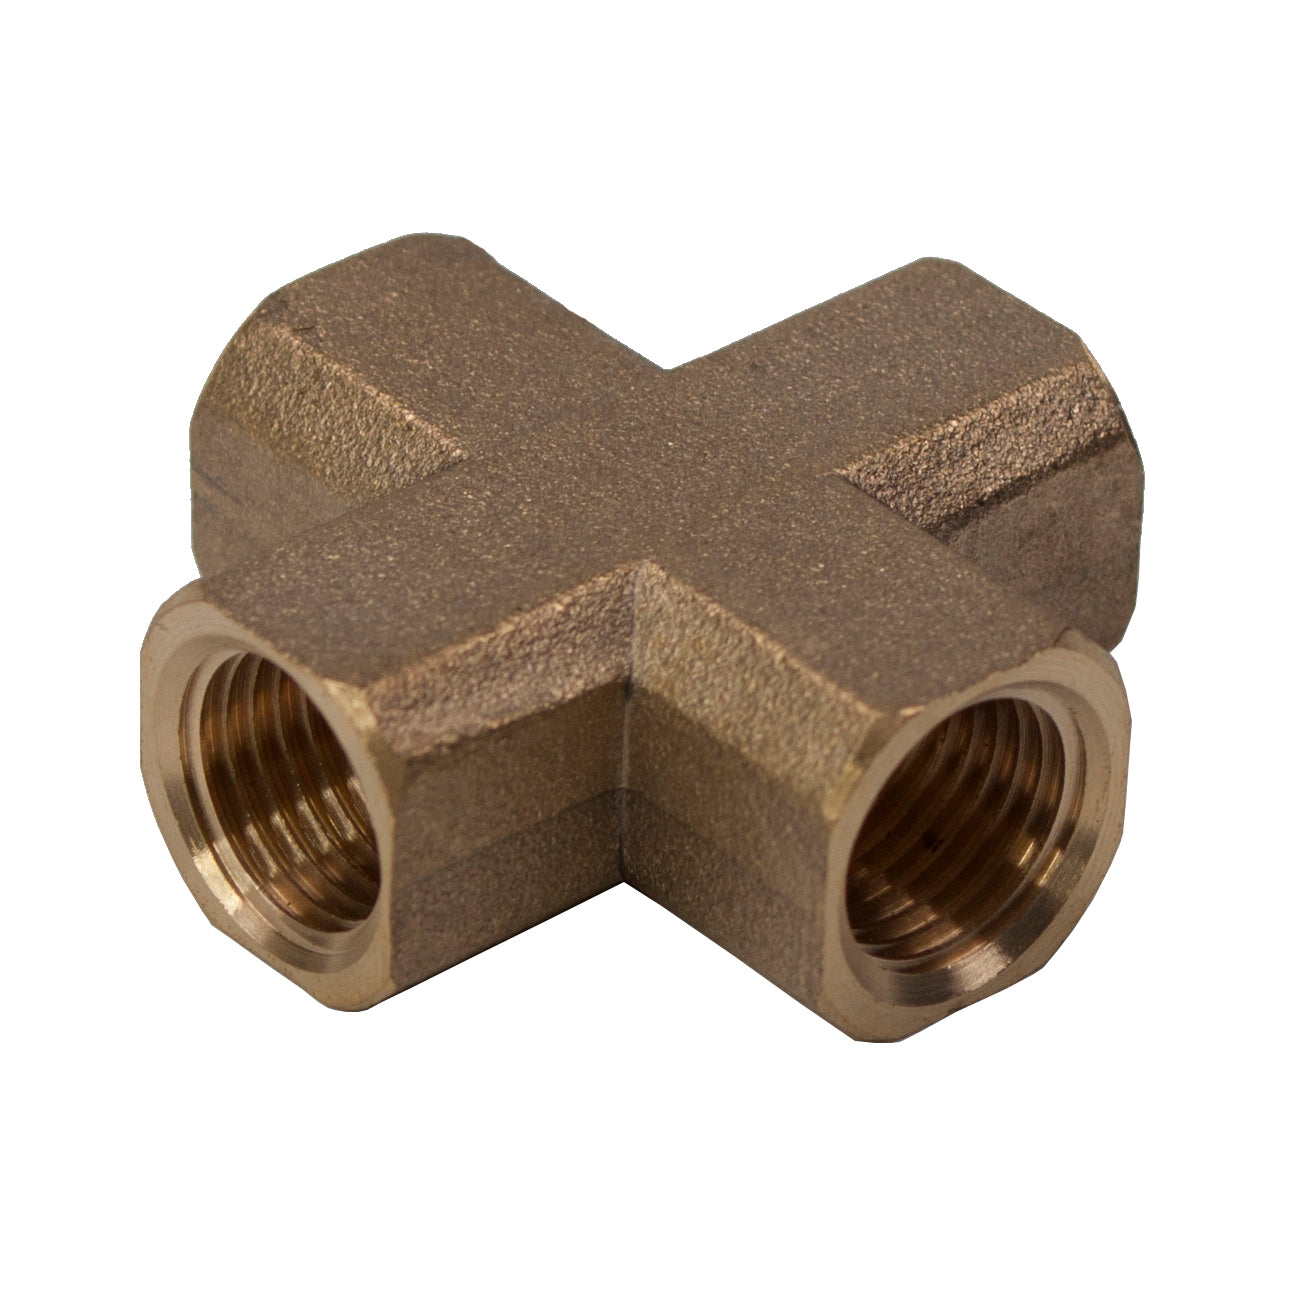 LTWFITTING Brass BSP Pipe Female Cross Fitting 1/4-Inch BSPP 4 Way Fuel Air Water (Pack of 200)